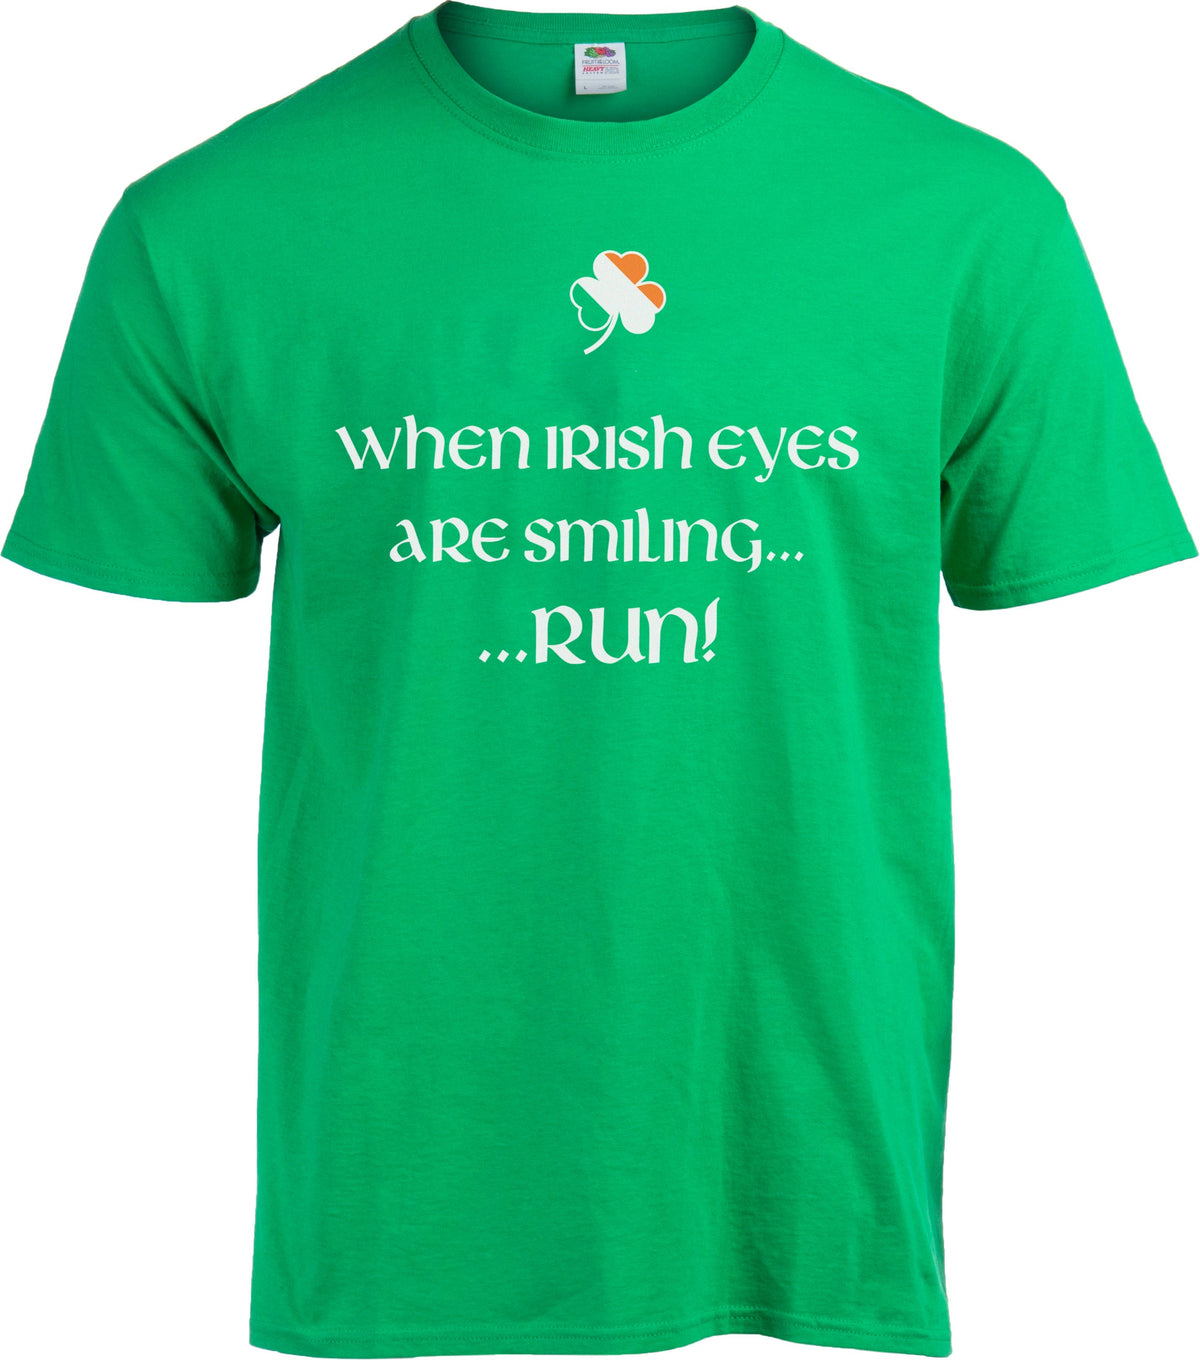 When Irish Eyes Are Smiling, Run! - St. Patrick's Day Funny T-shirt - Kid's/Youth